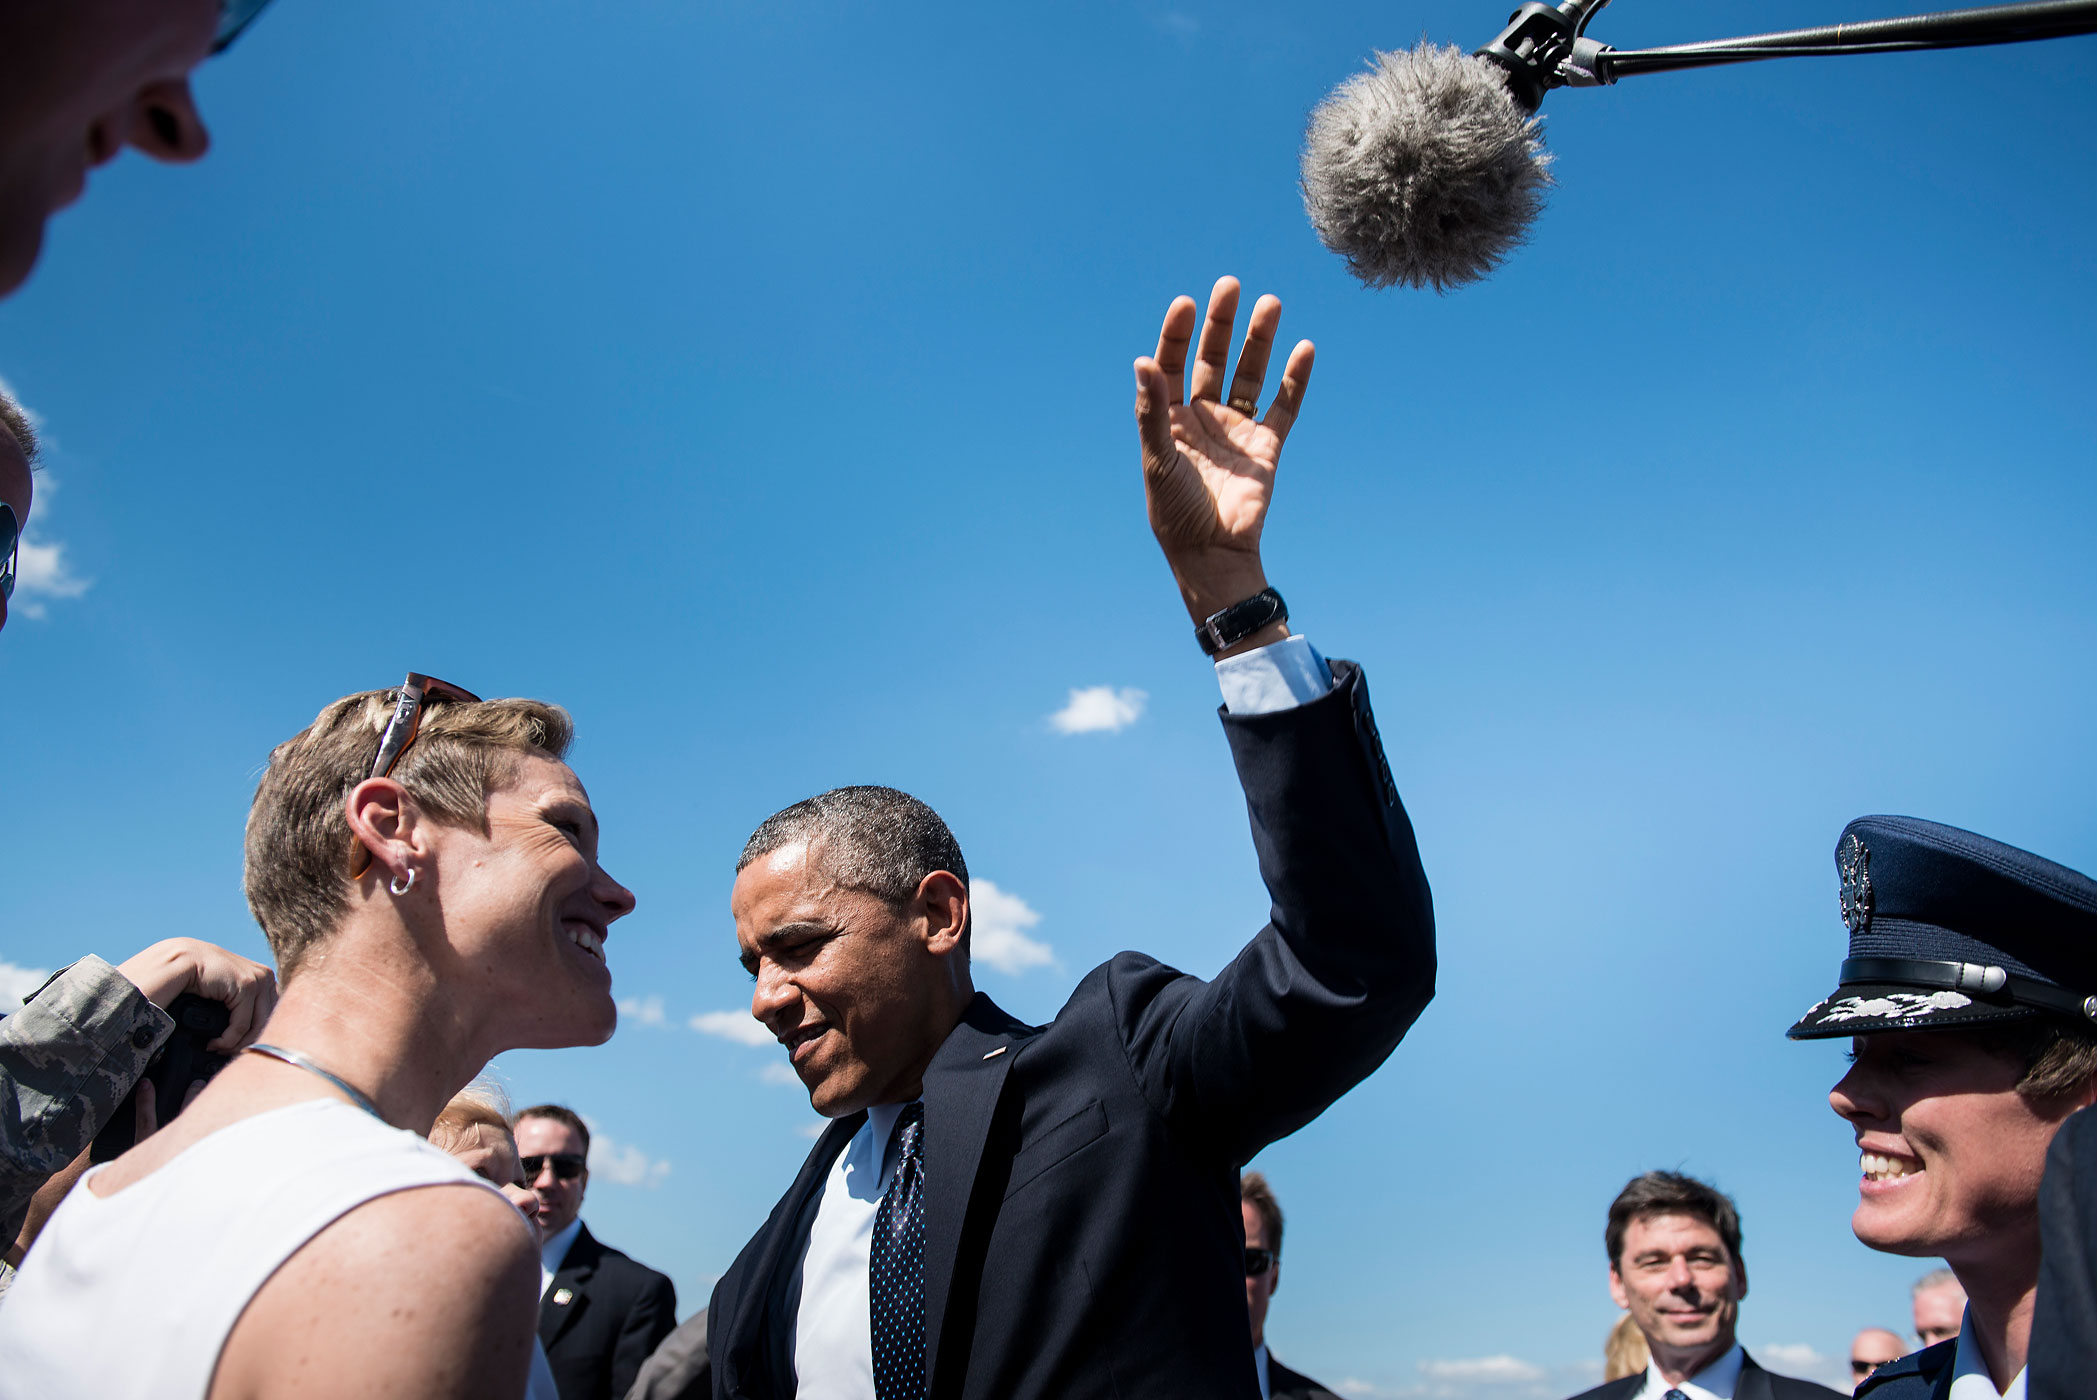 President Barack Obama reaches for a boom microphone while joking with a baby in a crowd of greeters at Whiteman Air Force Base in Missouri, July 24, 2013.